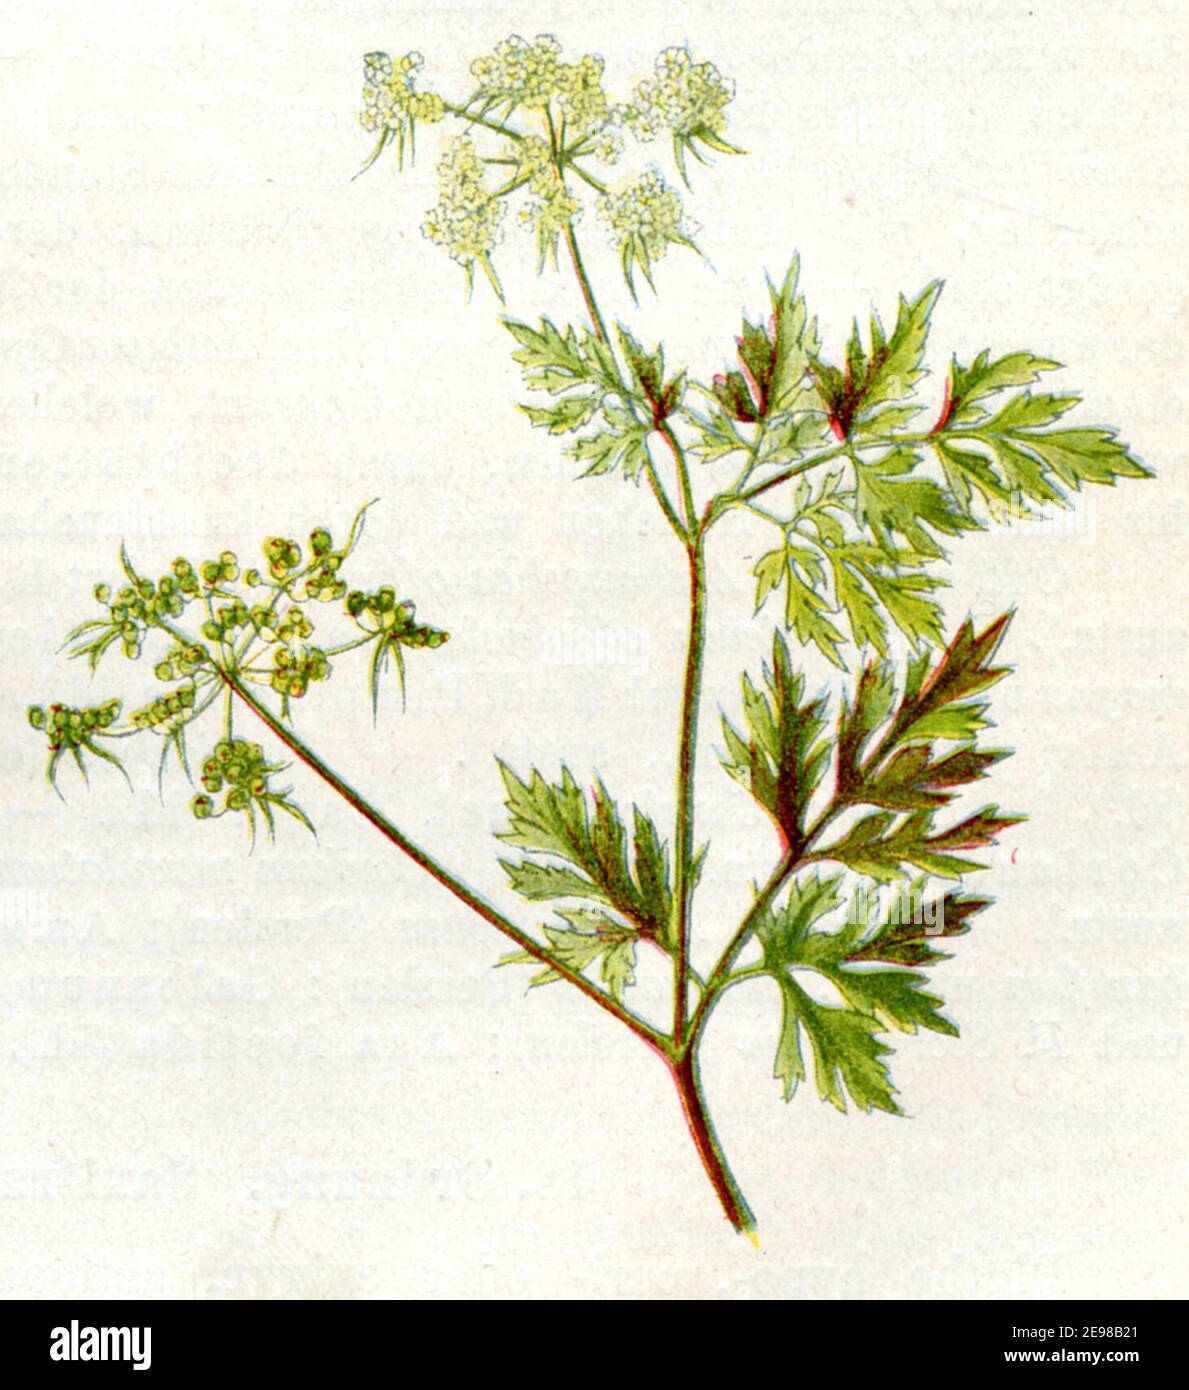 fool's parsley, fool's cicely, or poison parsley / Aethusa cynapium / Hundspetersilie  / botany book, 1900) Stock Photo